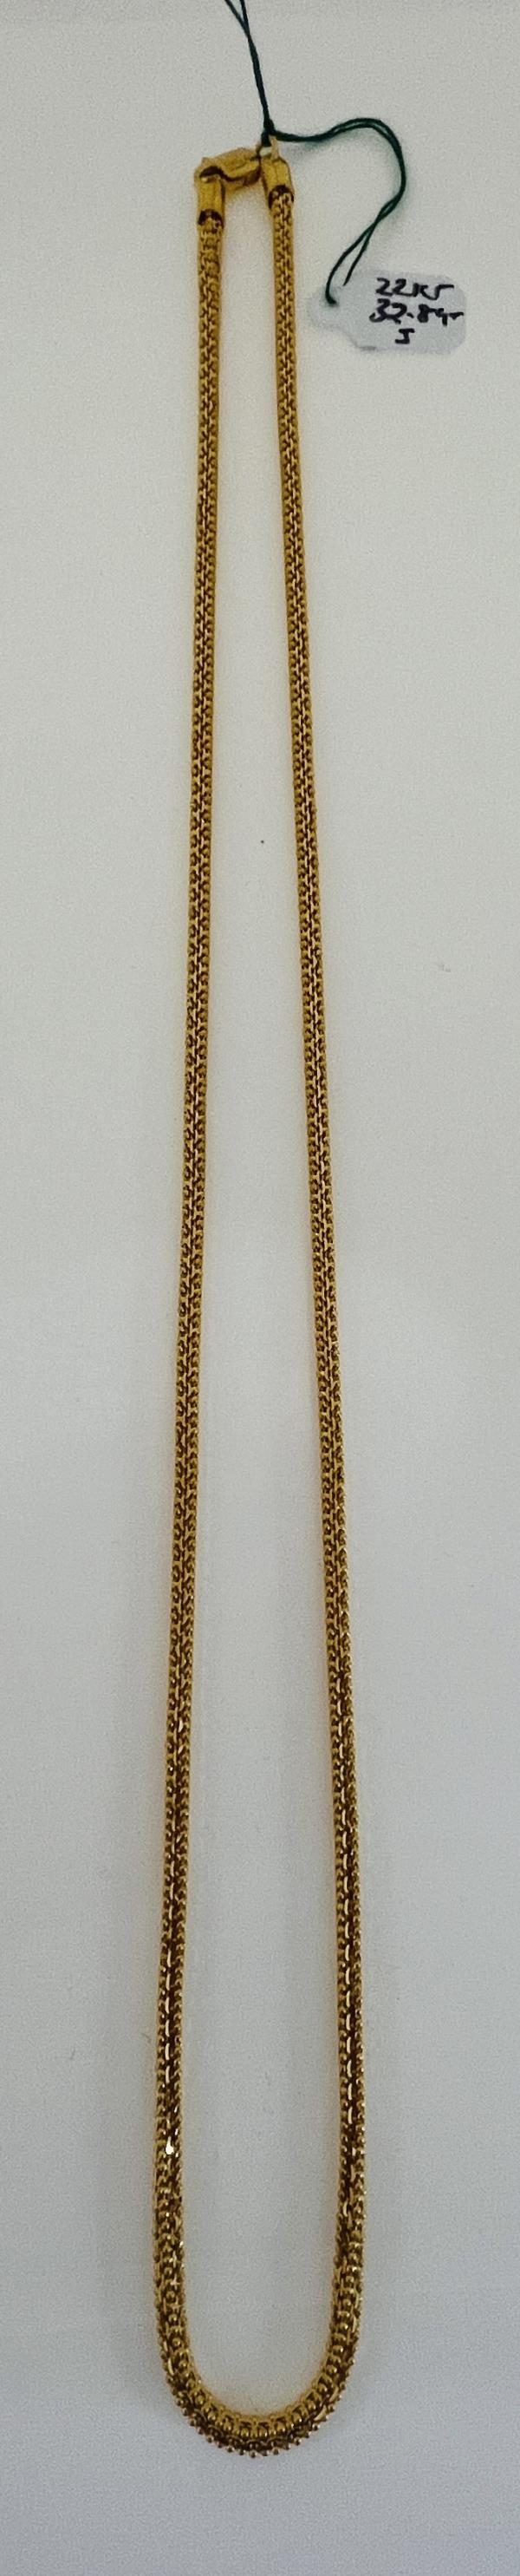 22KT GOLD CHAIN 22" 32.8GM